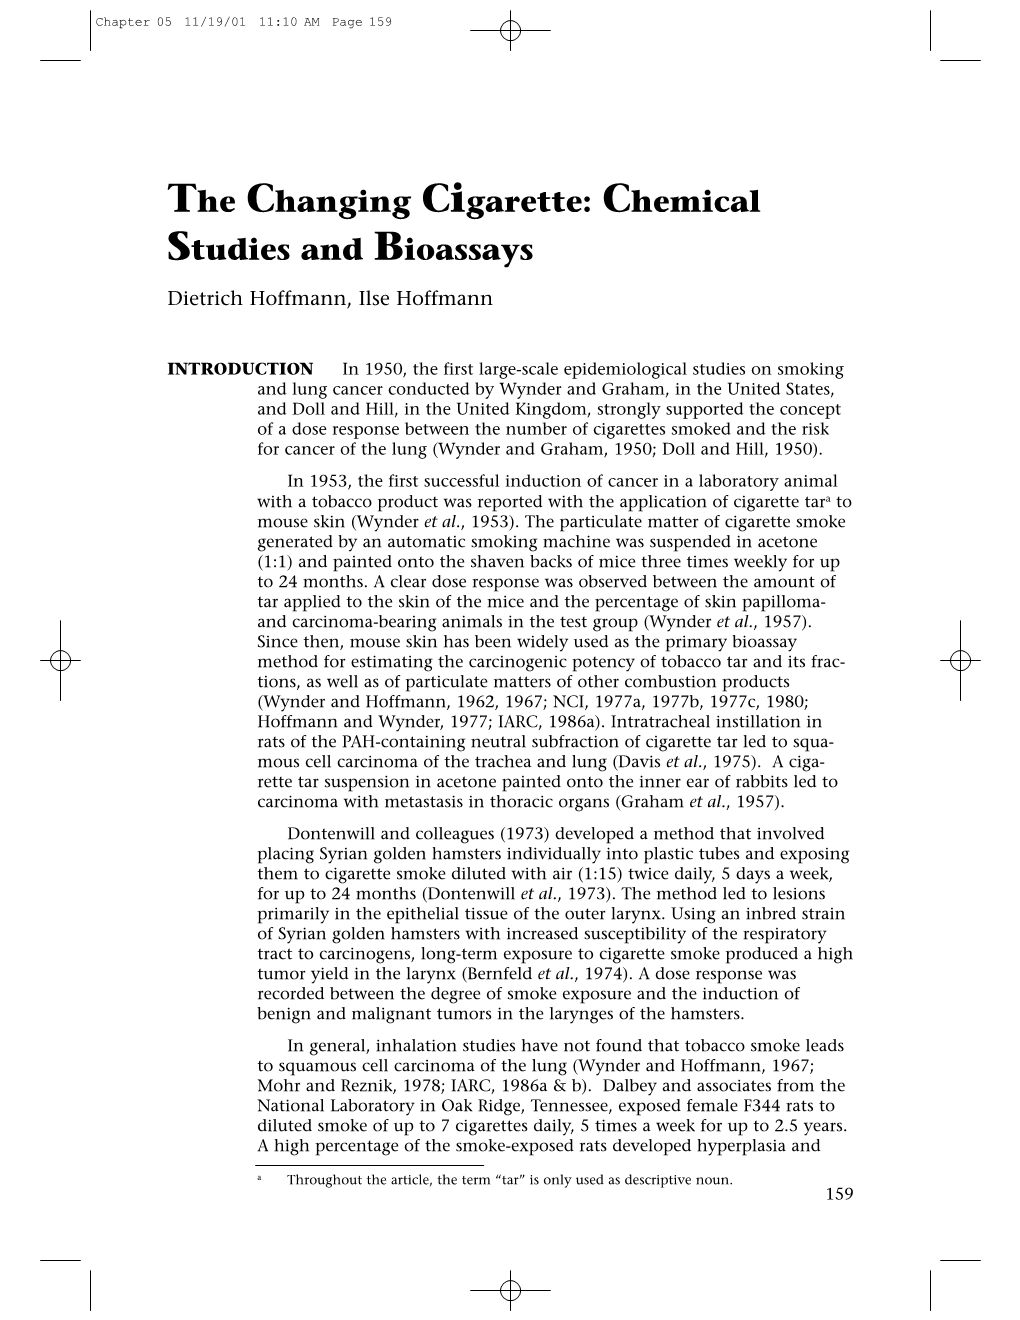 The Changing Cigarette: Chemical Studies and Bioassays